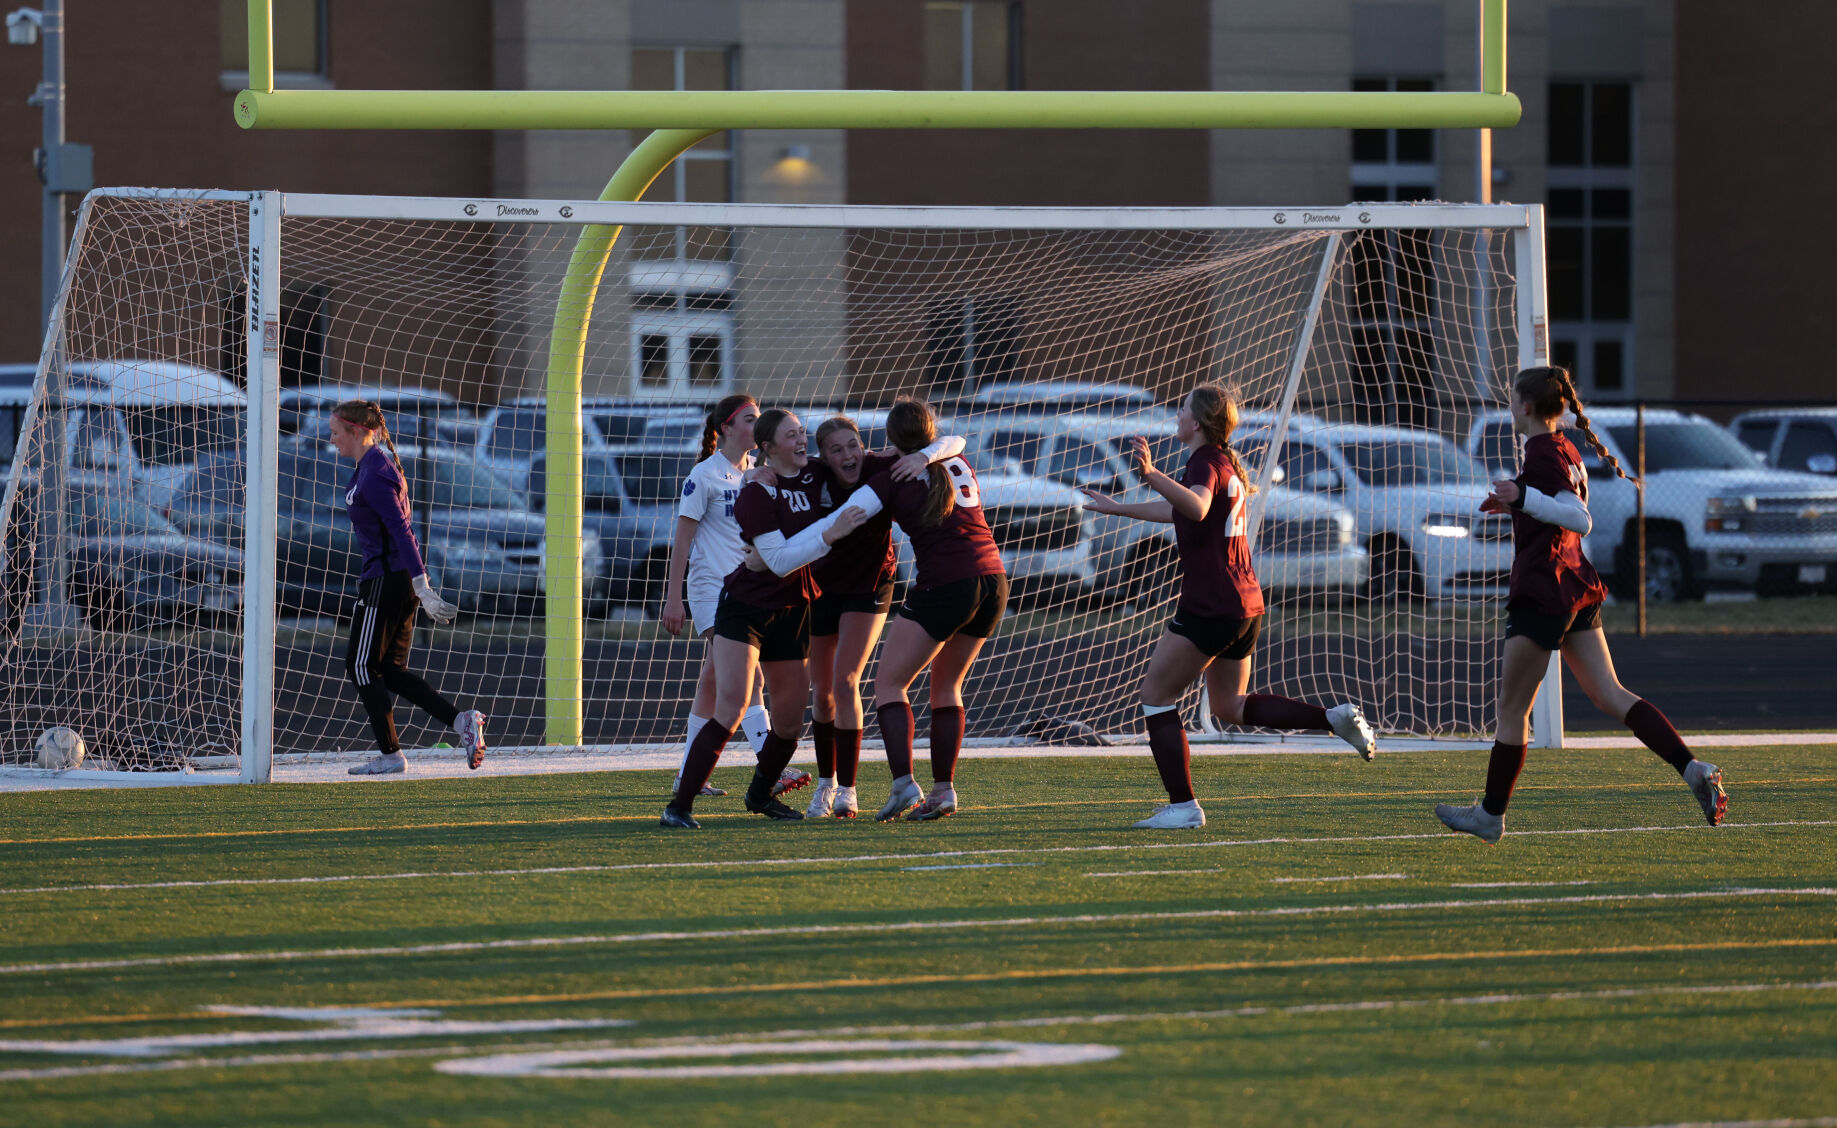 Columbus High Girls Soccer Secures Victory Over Kearney with Last-Minute Goal